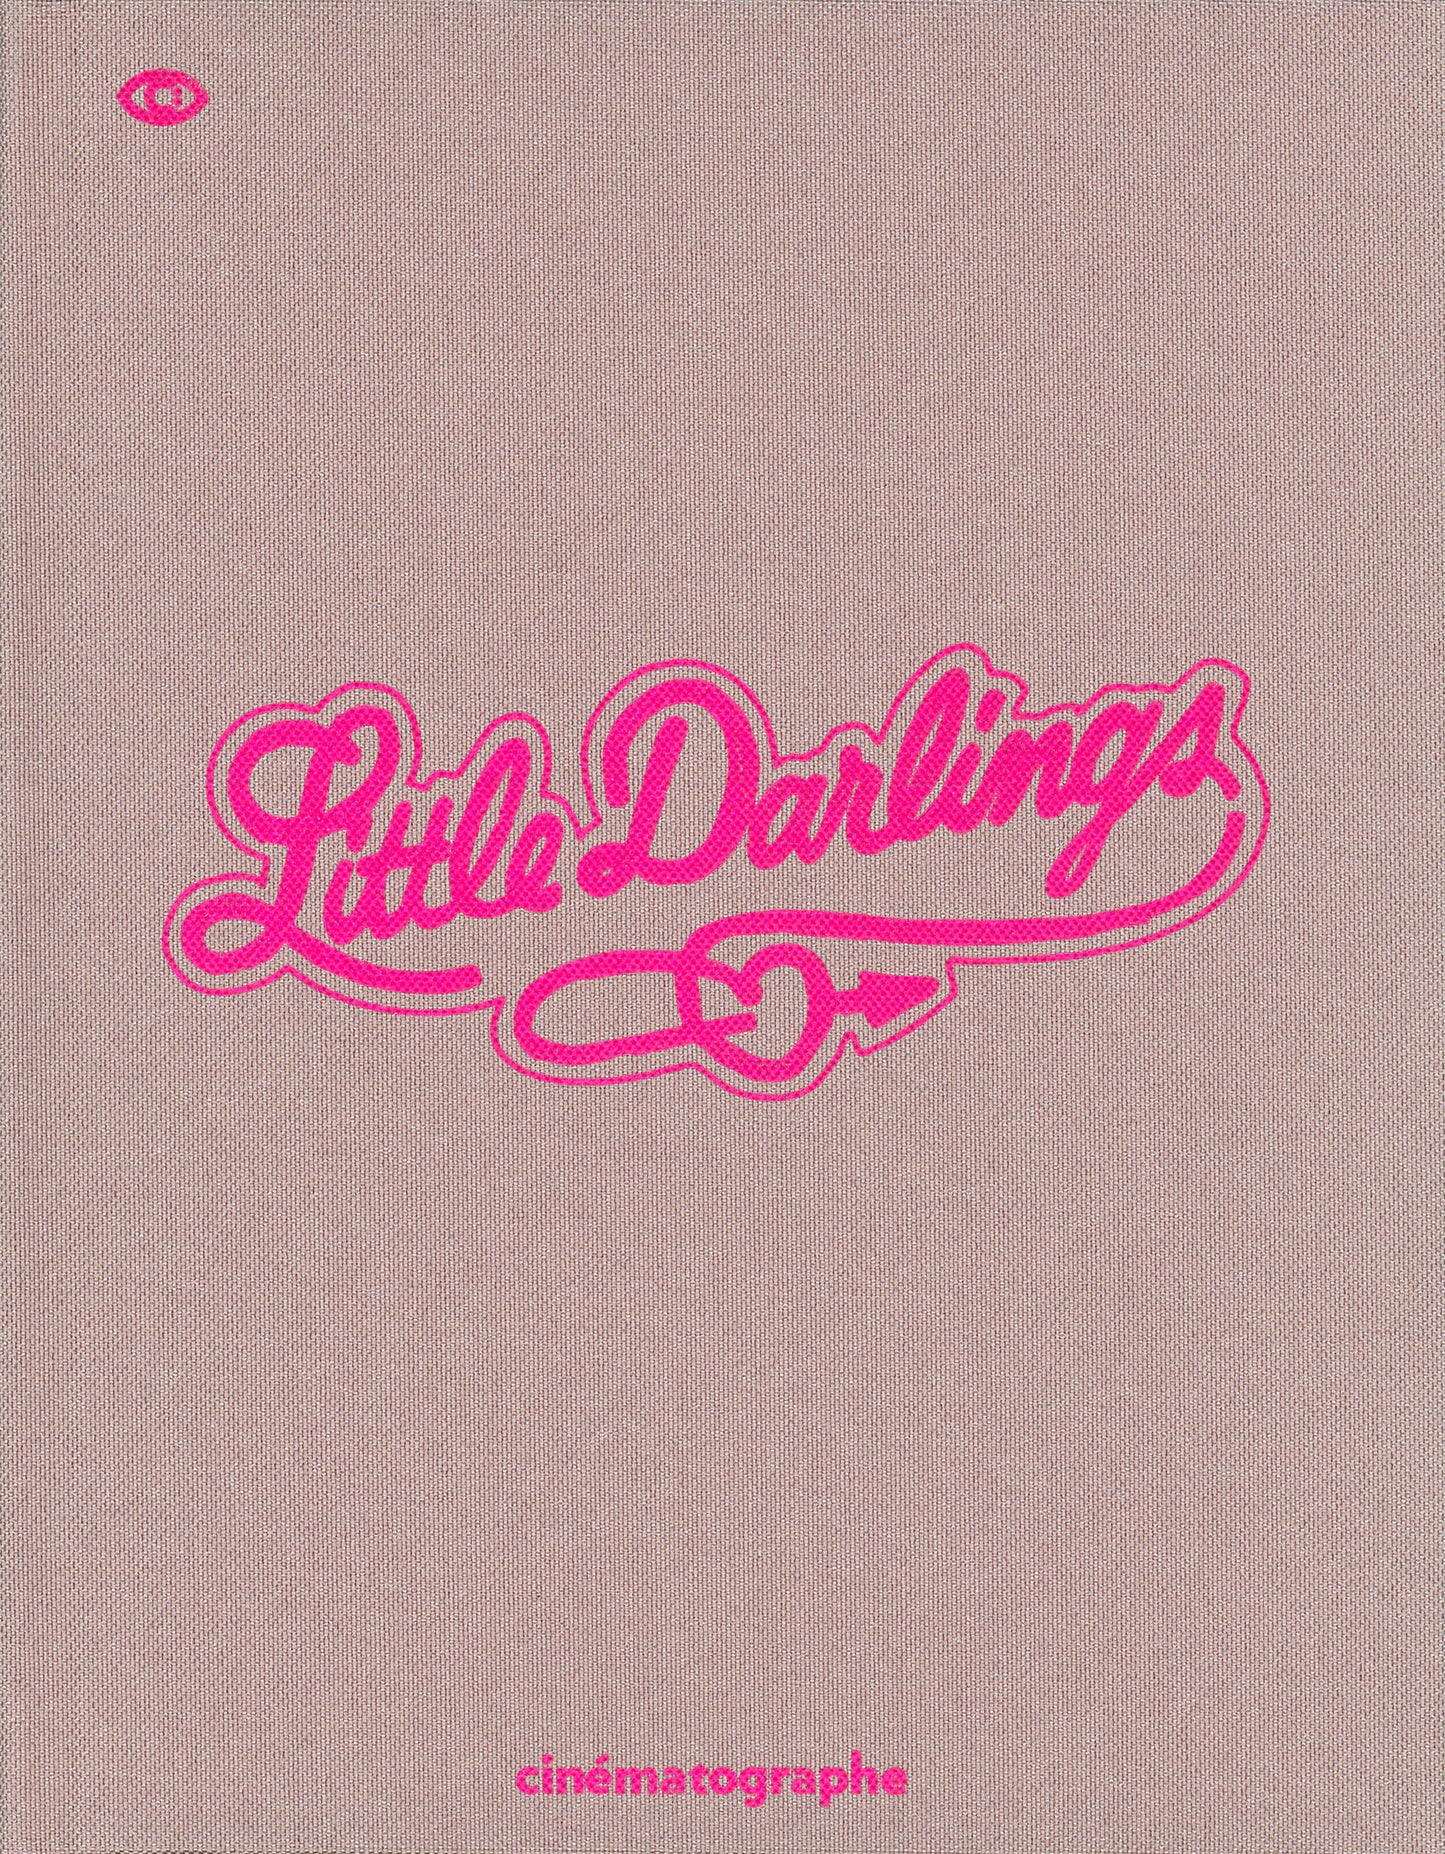 Little Darlings 4K: Limited Edition DigiBook (CIN-001)(Exclusive)